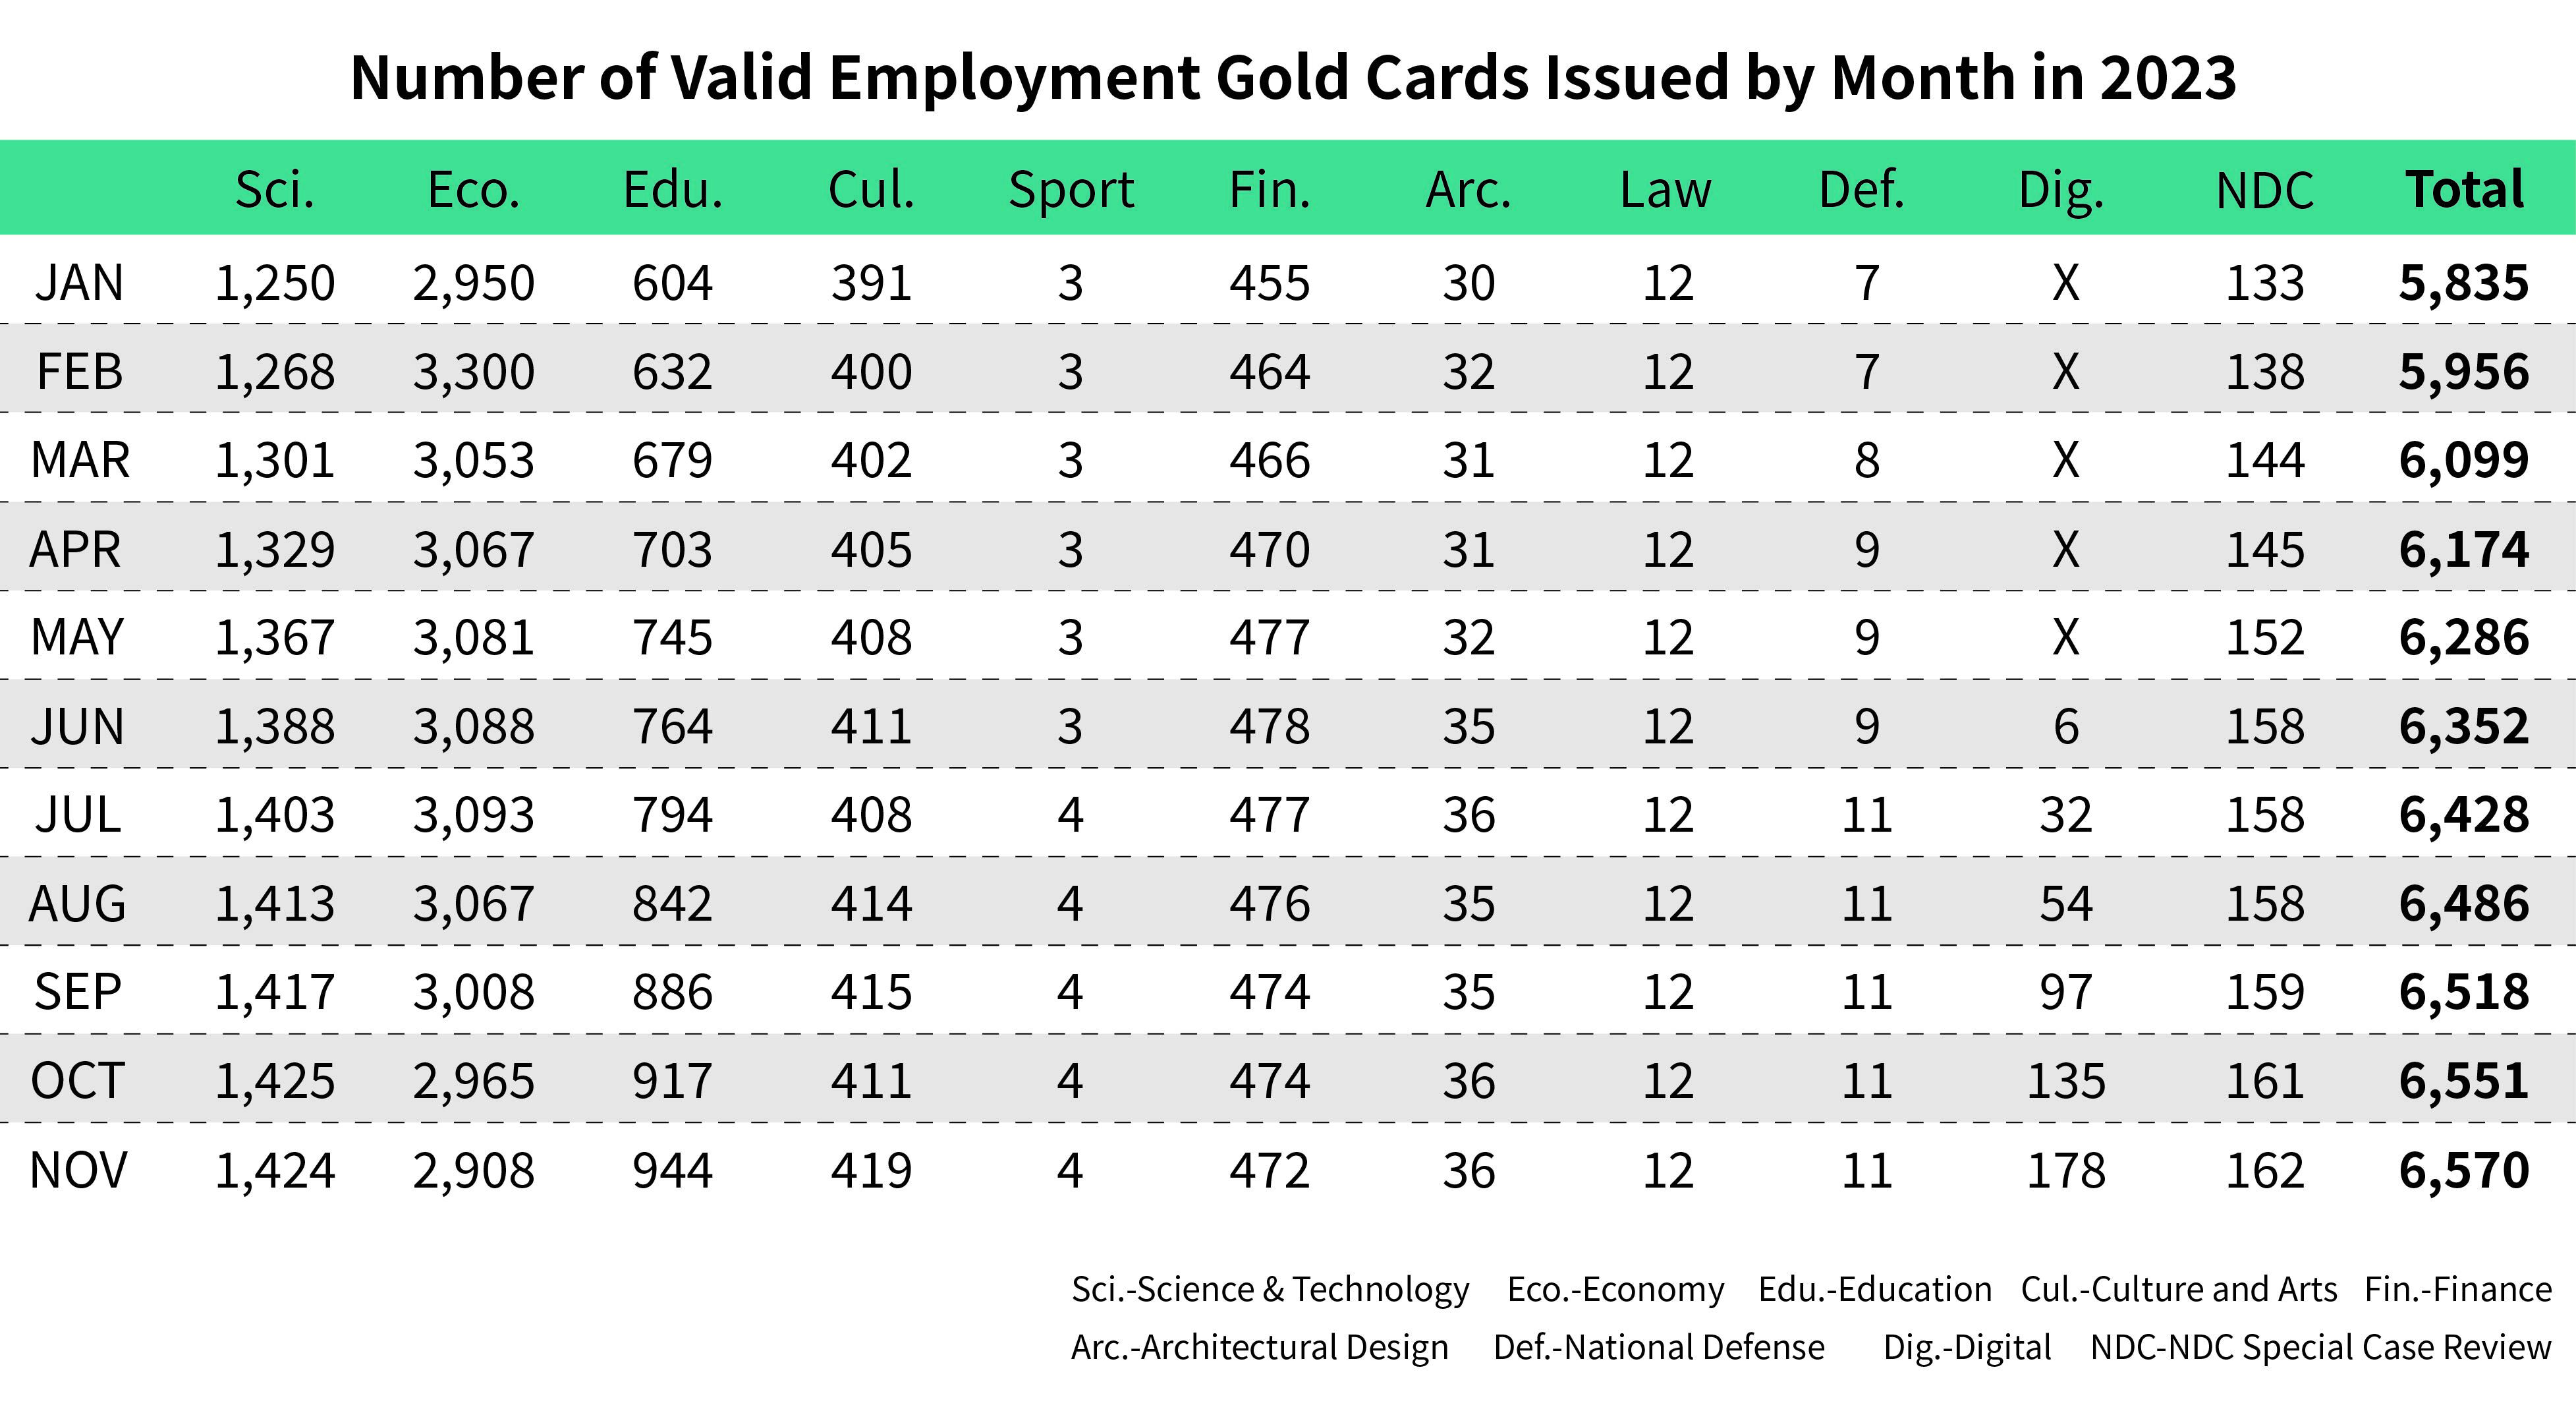 Number of Valid Employment Gold Cards Issued by Month-November